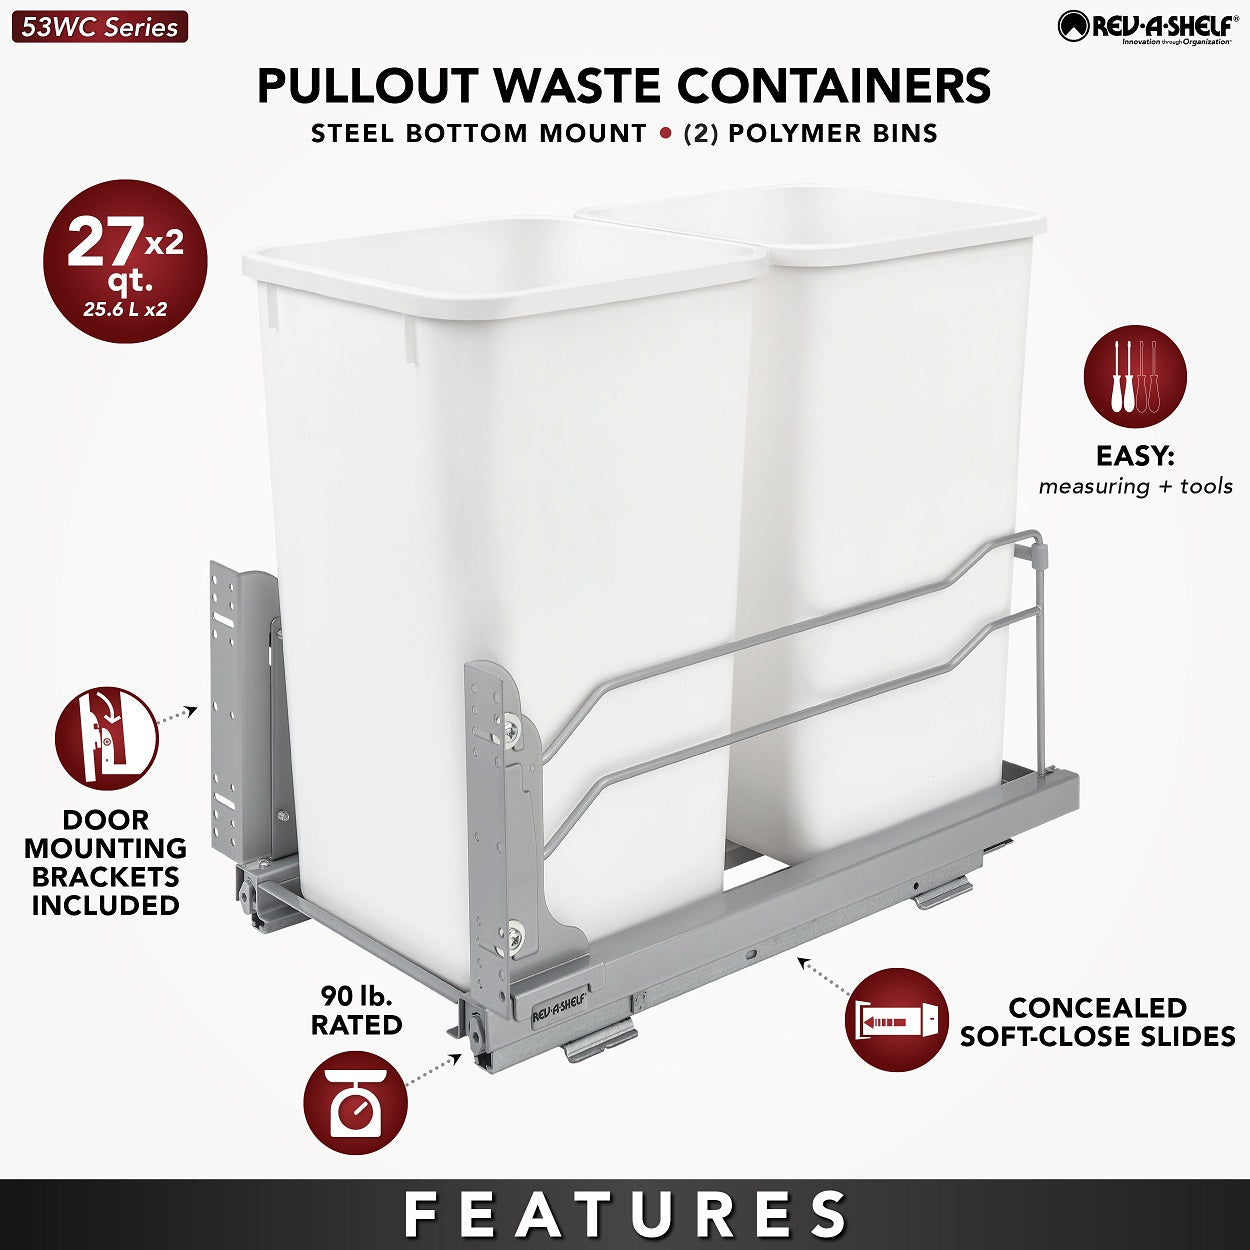 Rev-A-Shelf Double 27 Quart Pull-Out Waste Container Soft-Close 53WC-1527SCDM-217